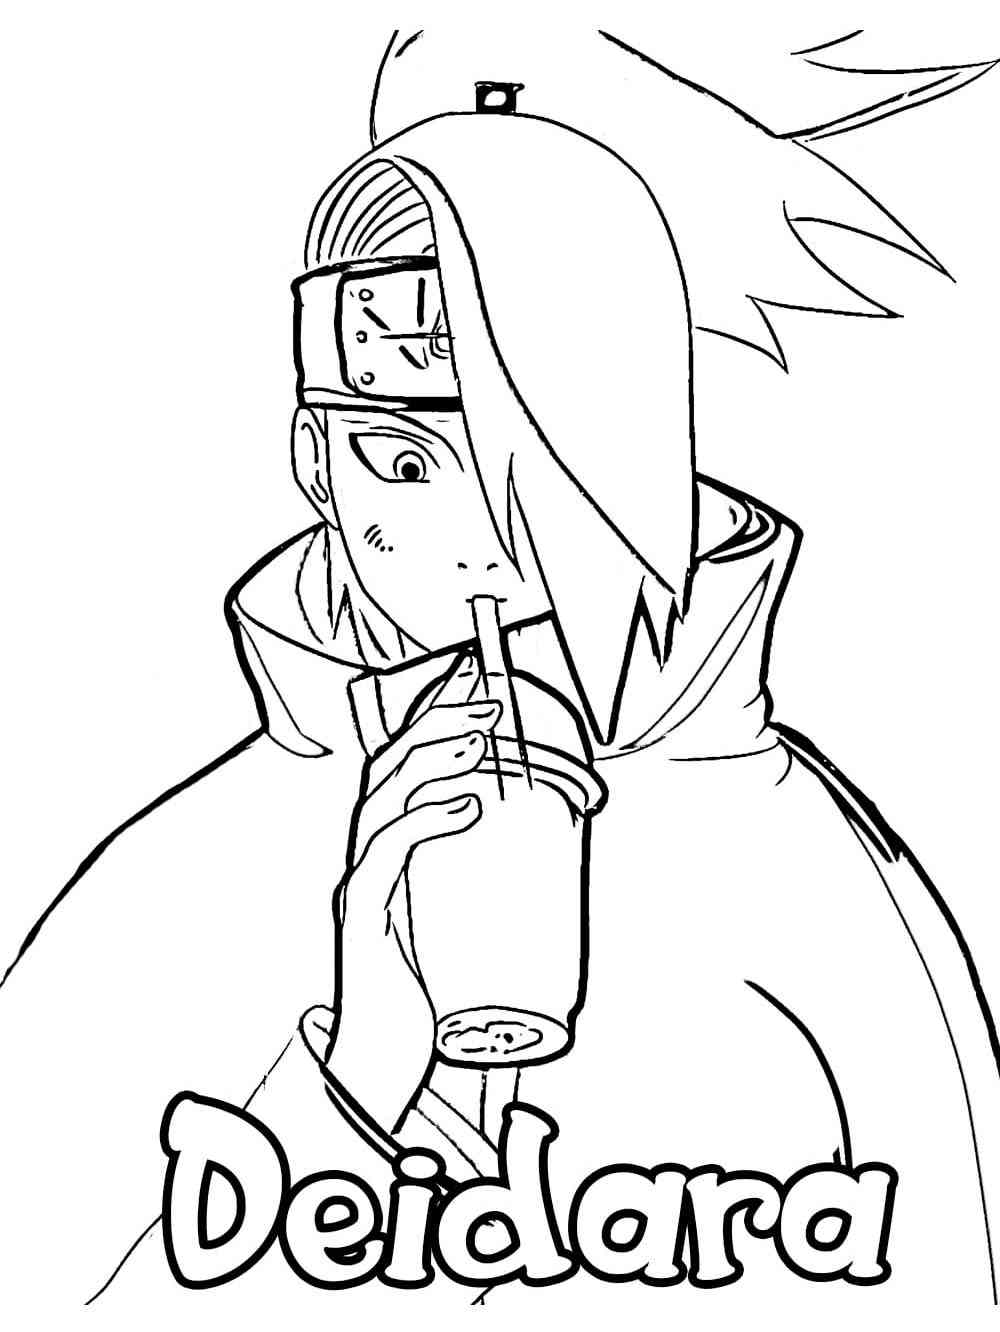 Deidara drinks from a glass coloring page